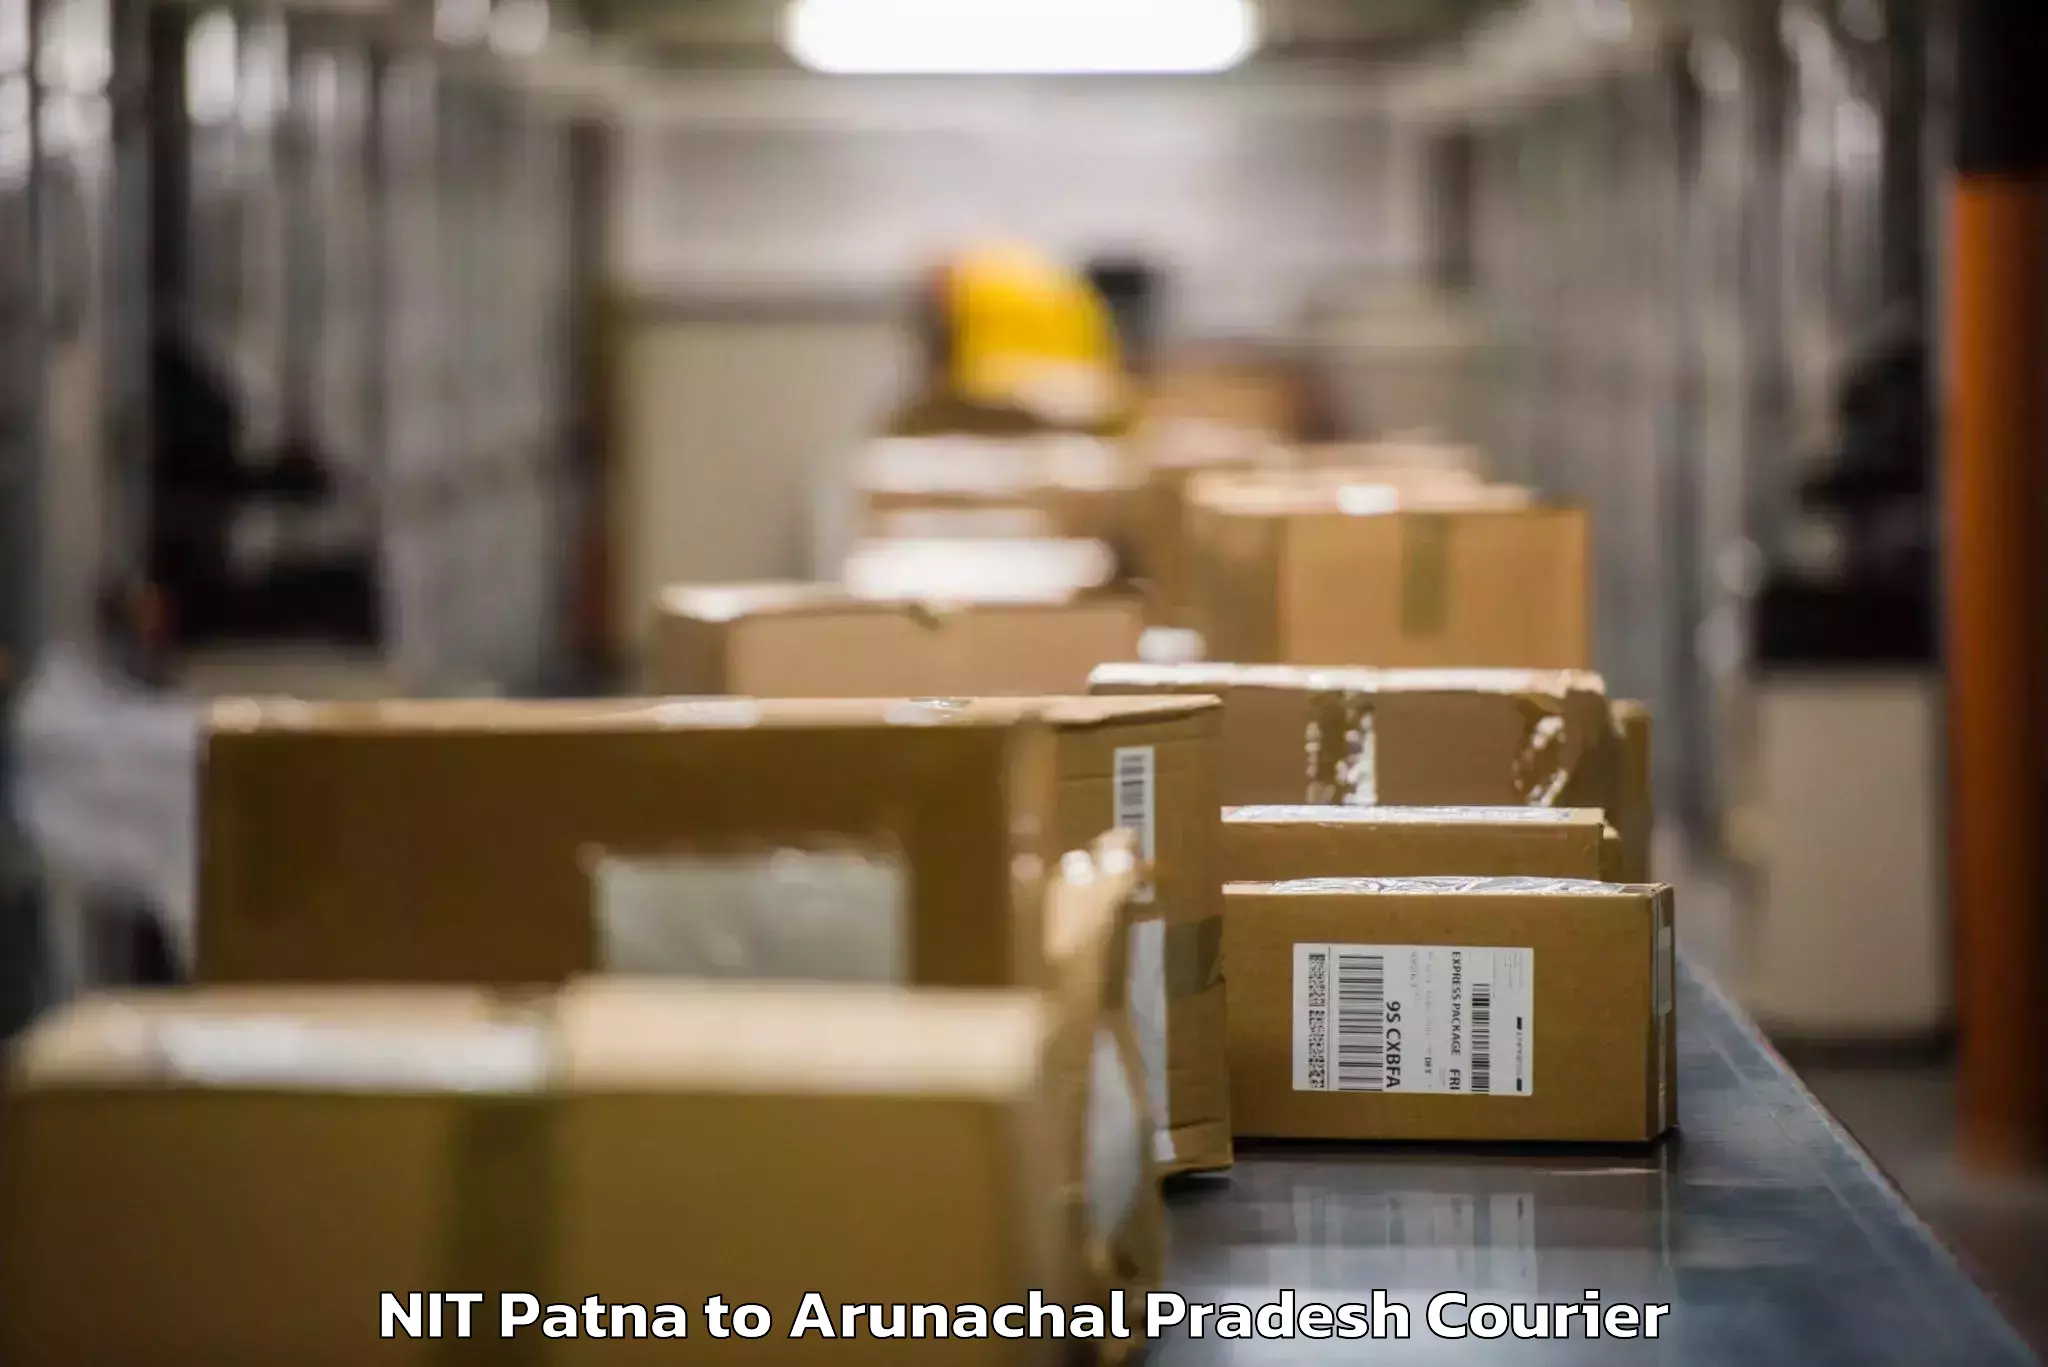 Baggage transport network NIT Patna to Aalo